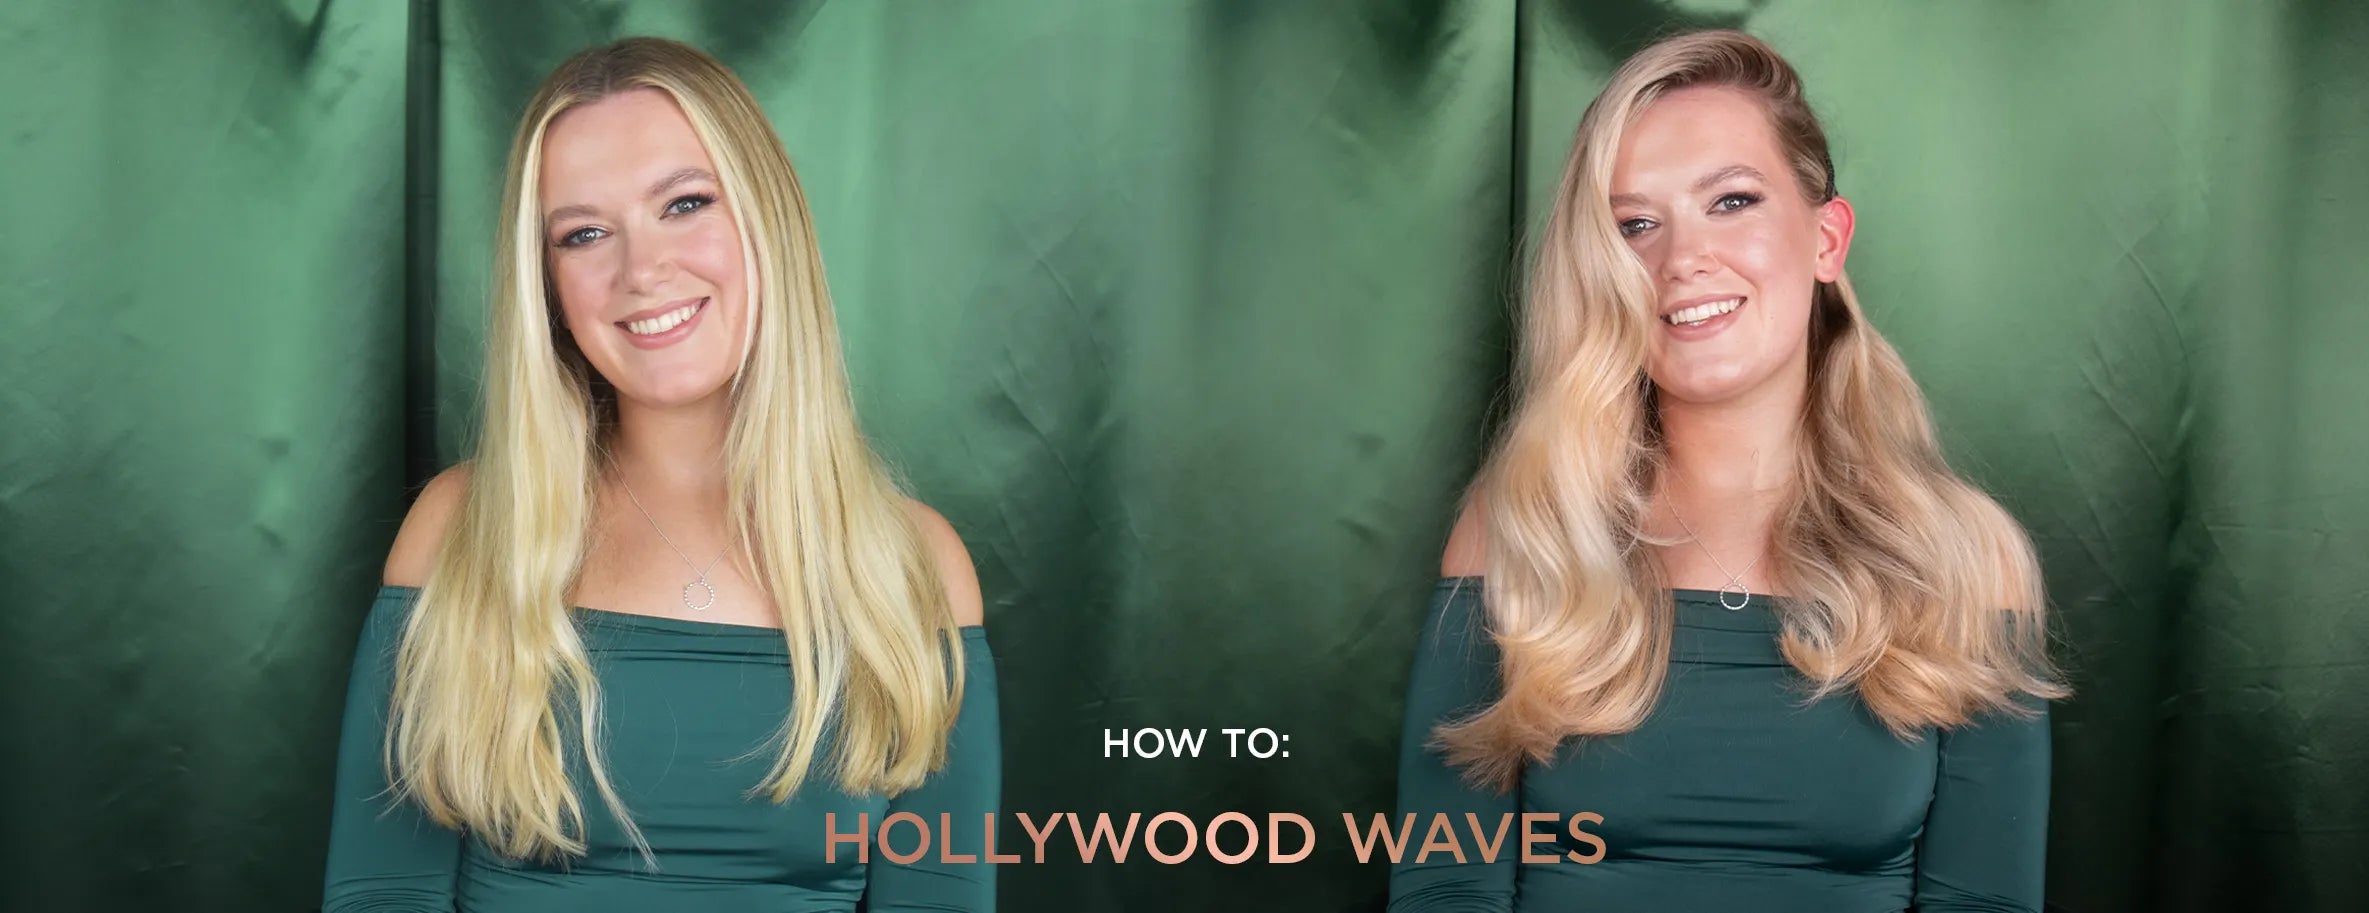 Before and after image of smiling blonde model - the after shows hollywood waves. Text reads 'How to: Hollywood Waves'.